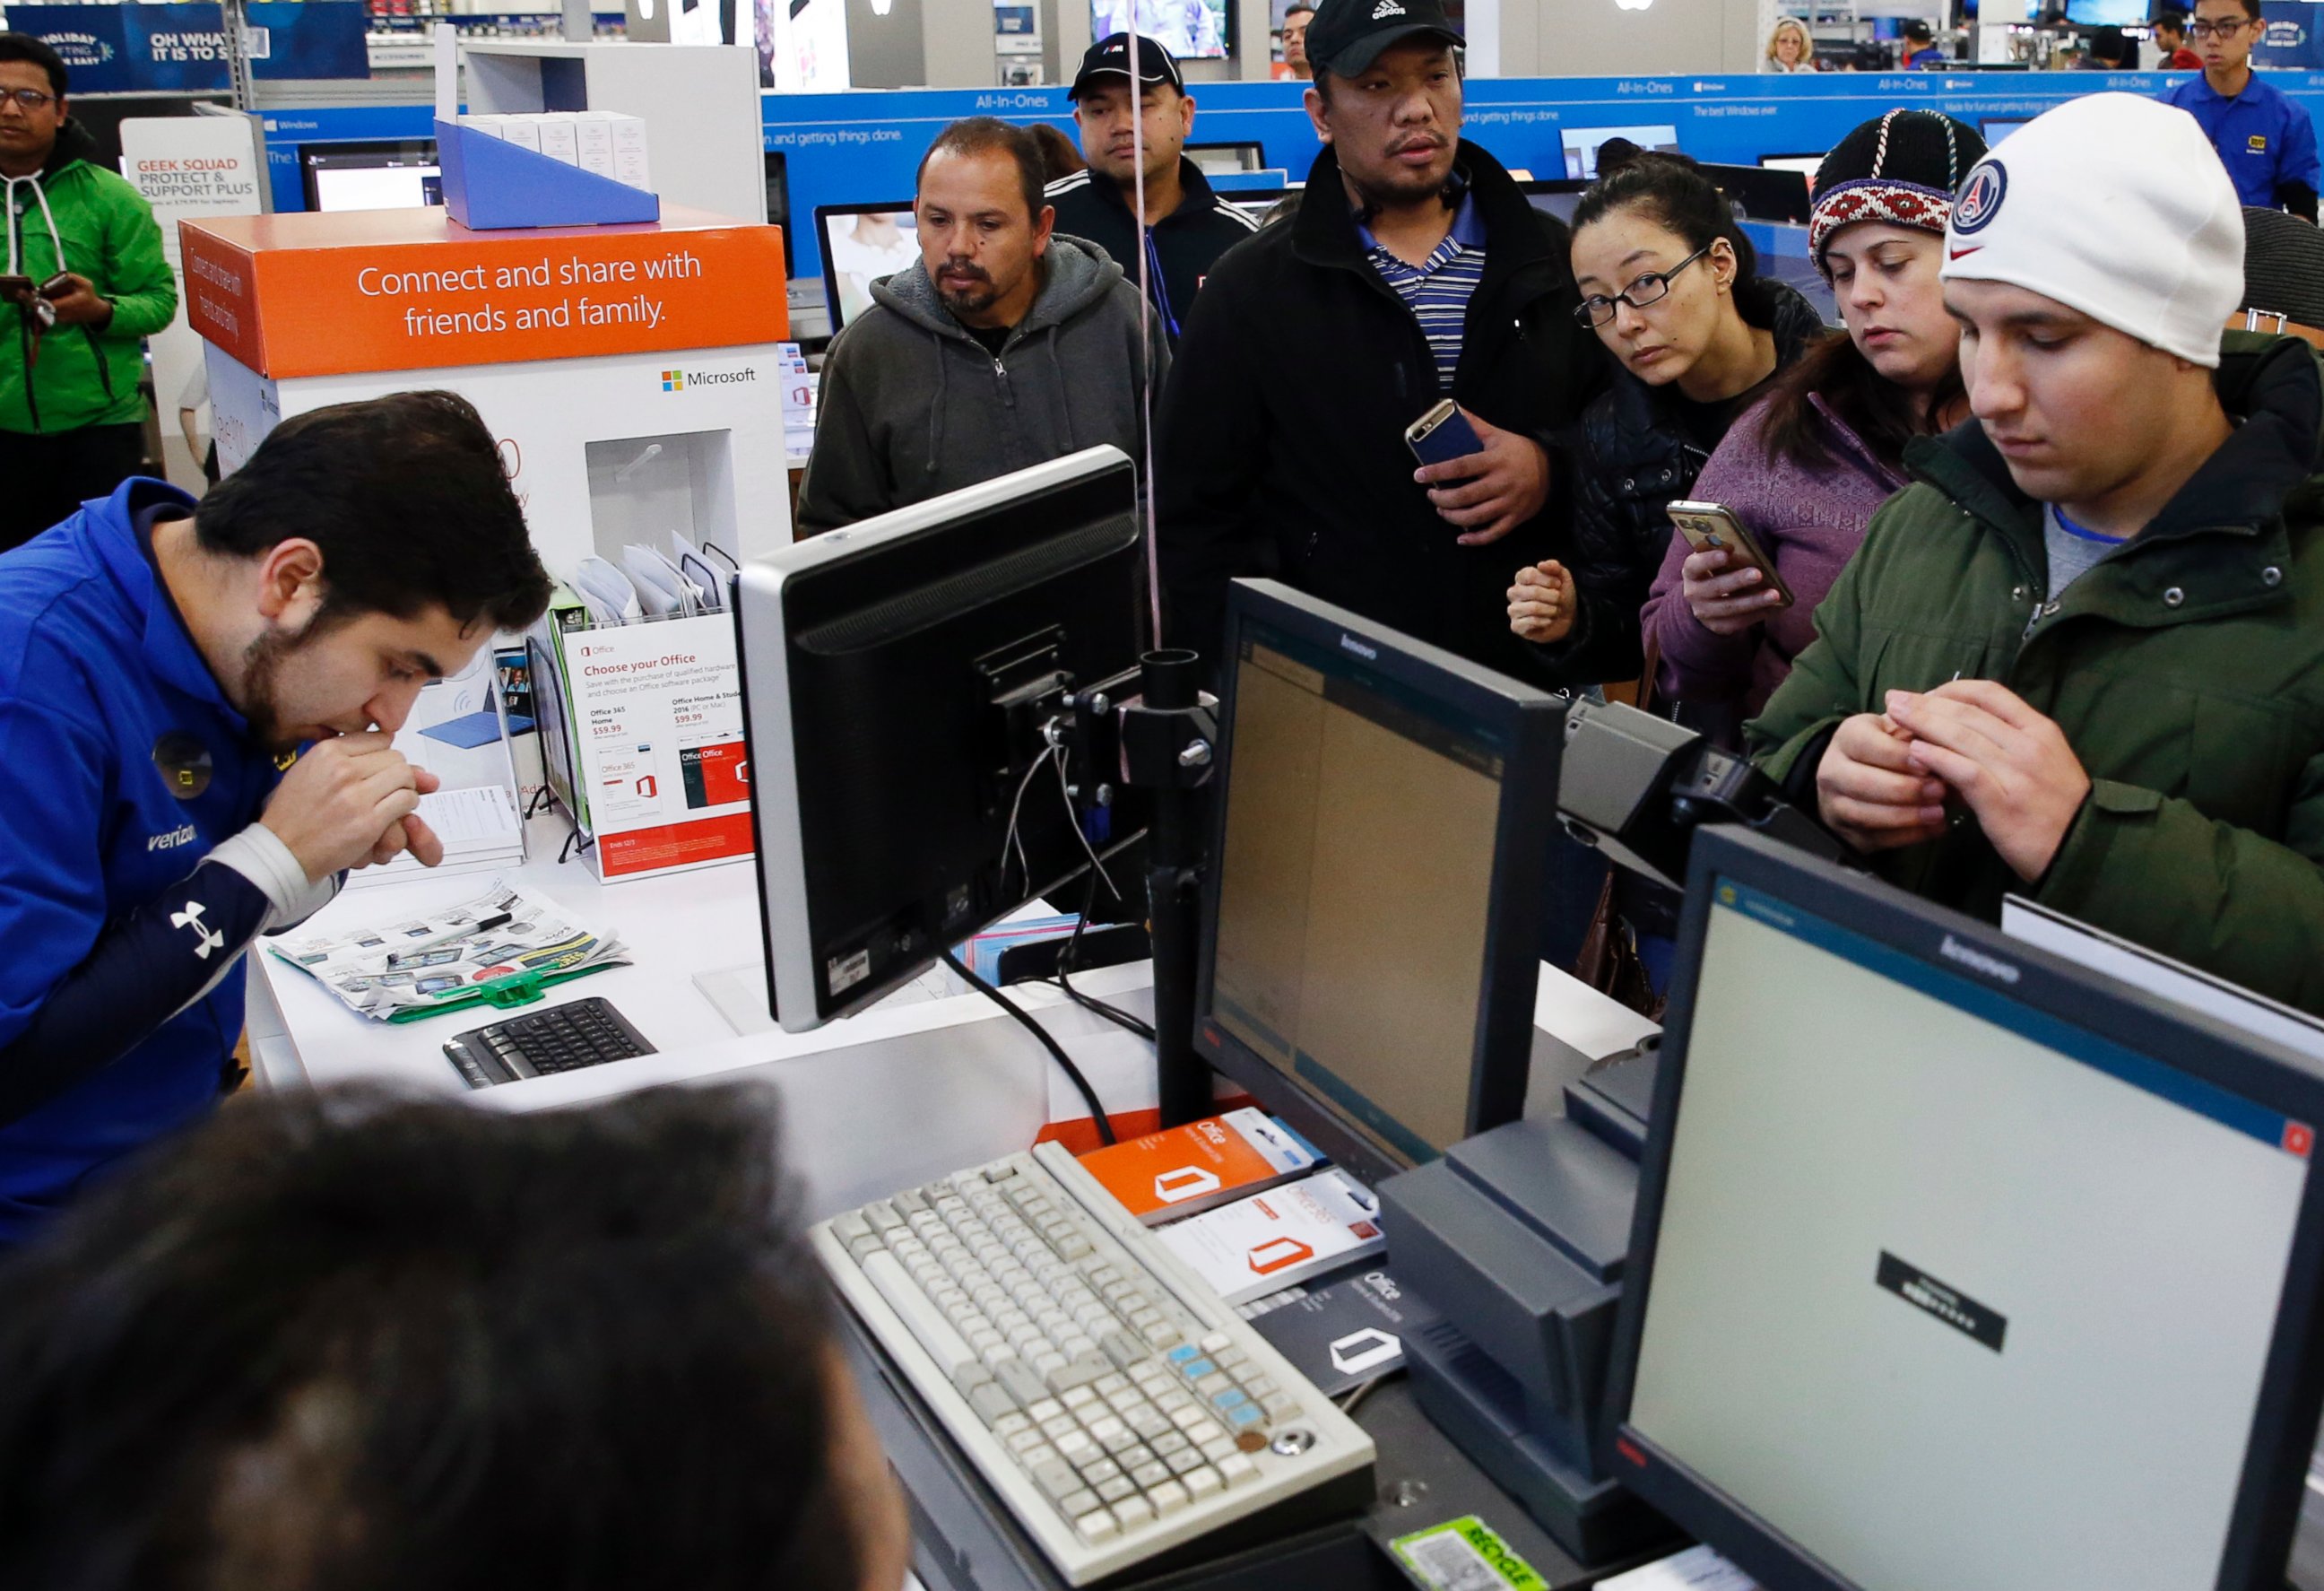 PHOTO: Shoppers line up for purchases at a Best Buy store on Friday, Nov. 25, 2016, in Skokie, Ill.